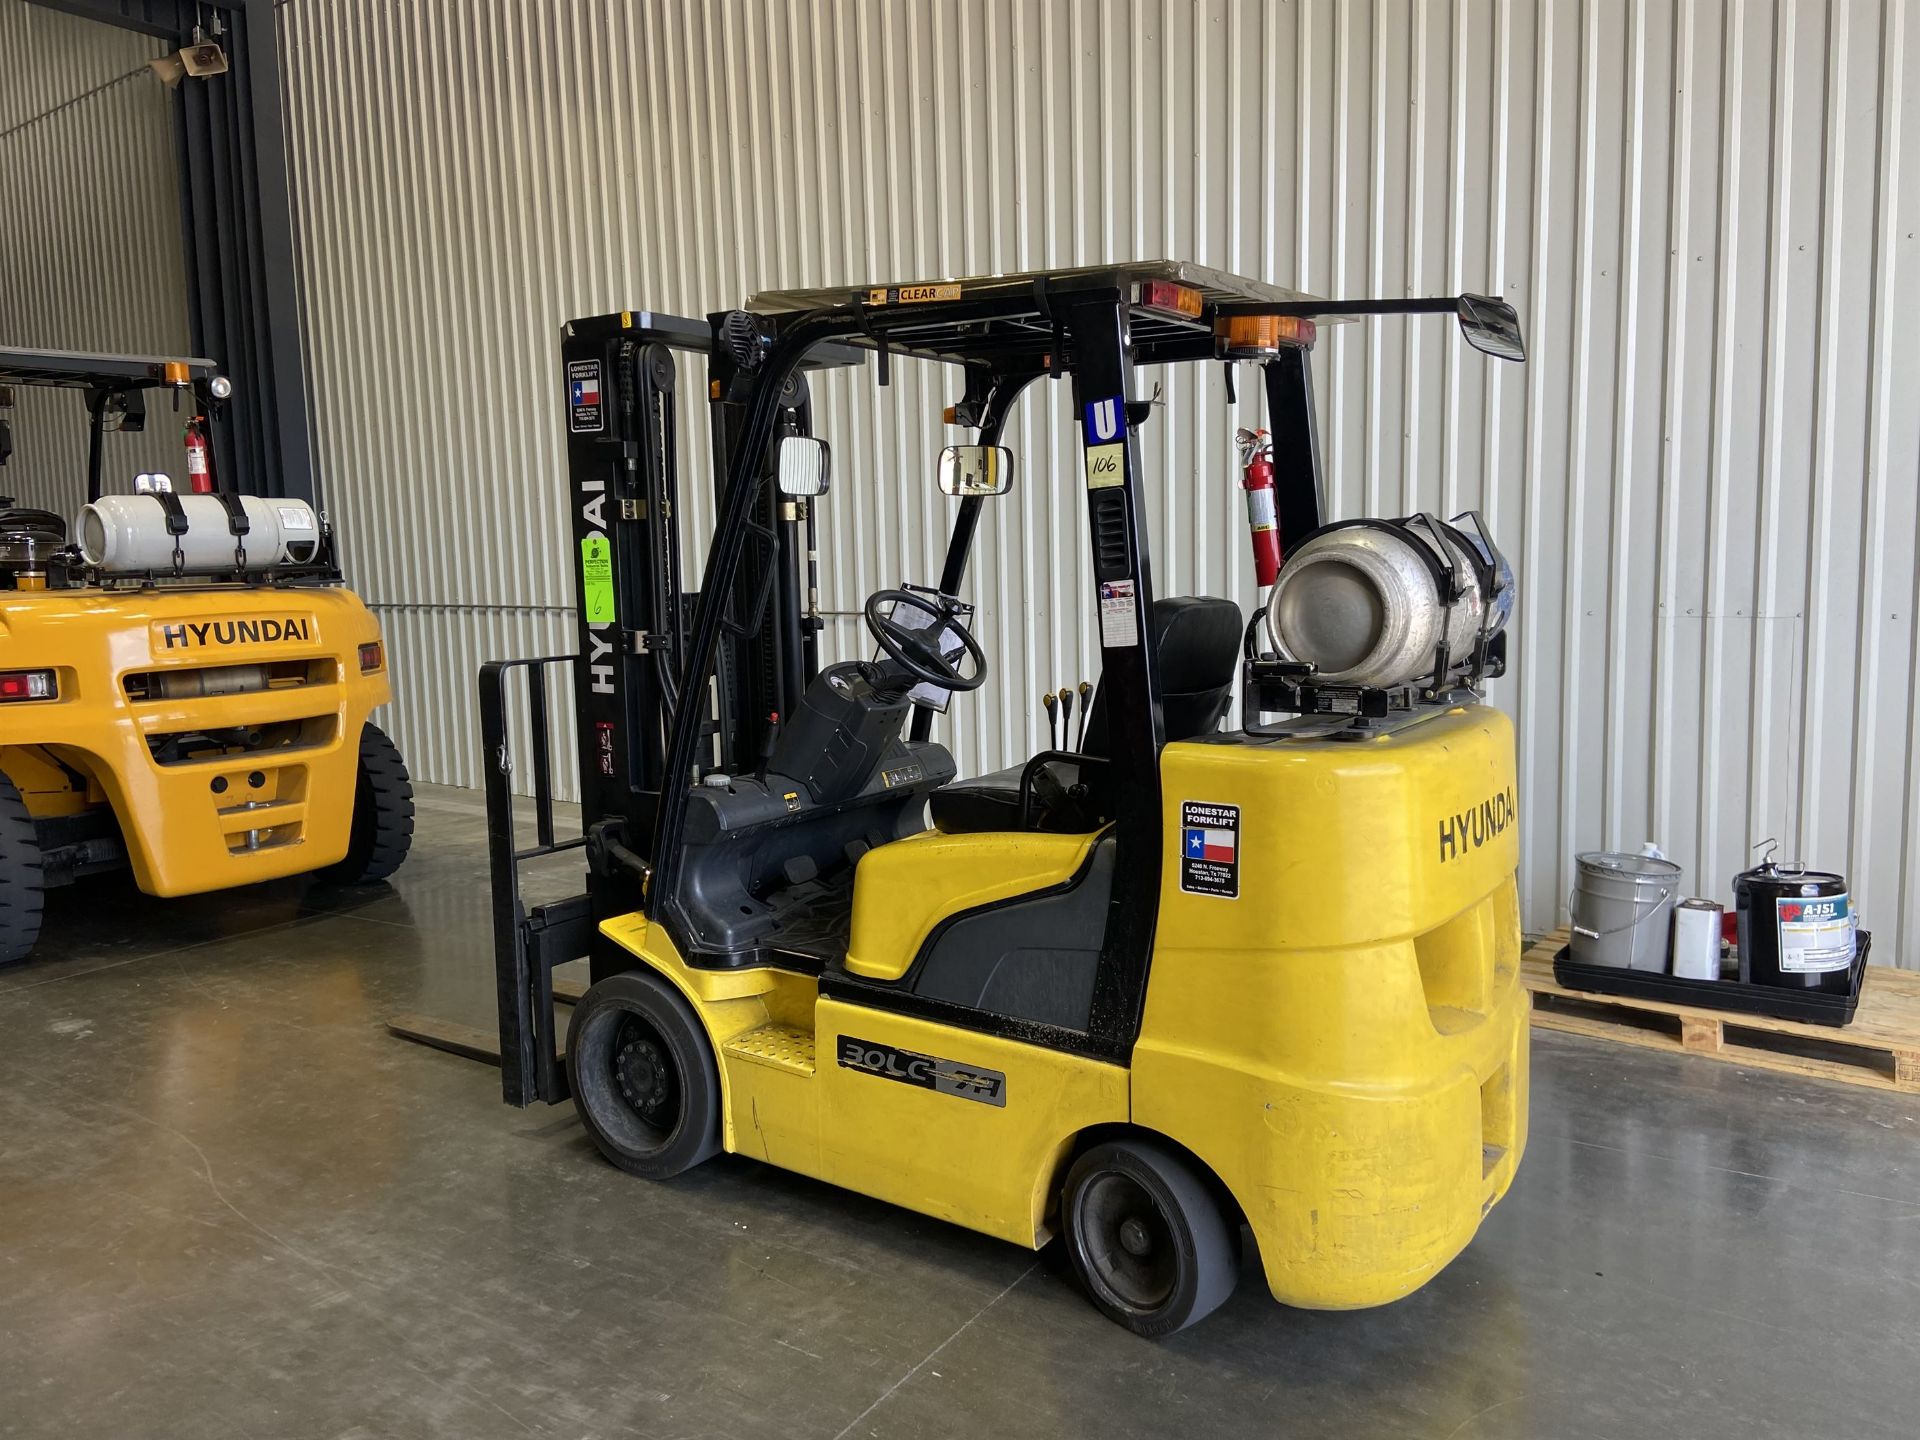 HYUNDAI 30LC-7A 5,560 Lb LP Forklift, s/n HHKHHC09EC0000148, w/ 185" 3-Stage Mast, 42" Forks, ( - Image 2 of 9